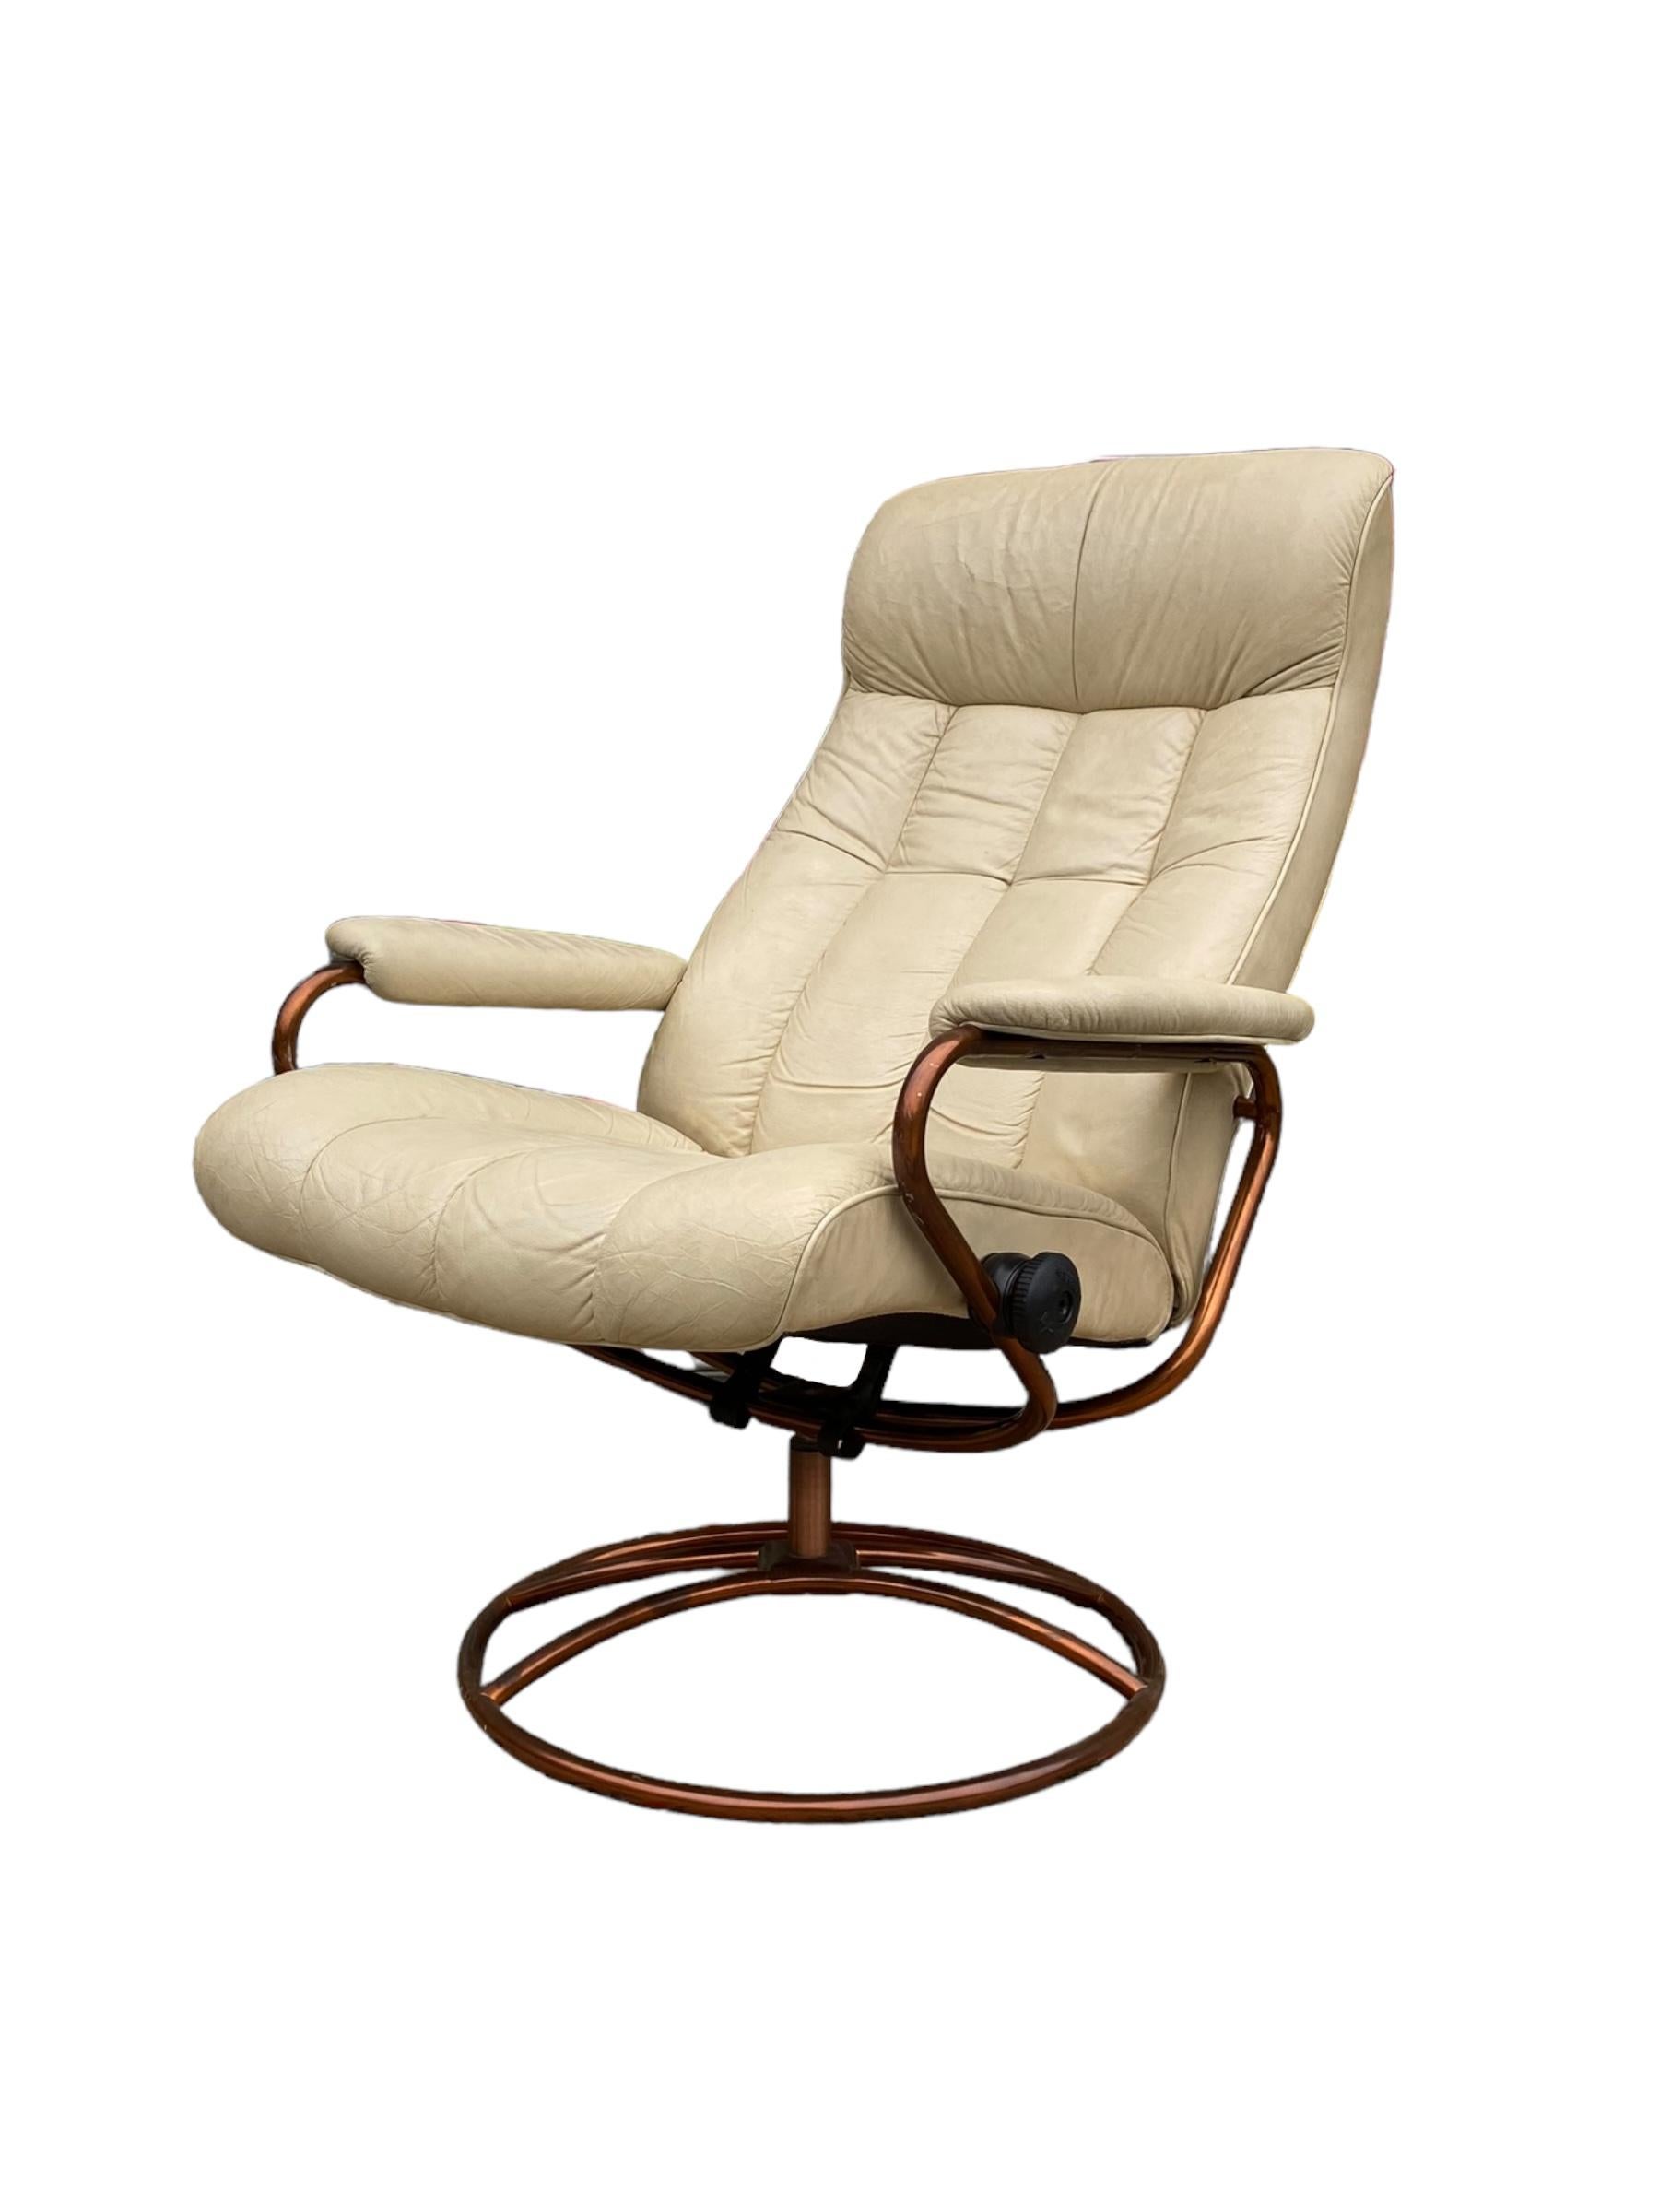 chairworks recliner and ottoman